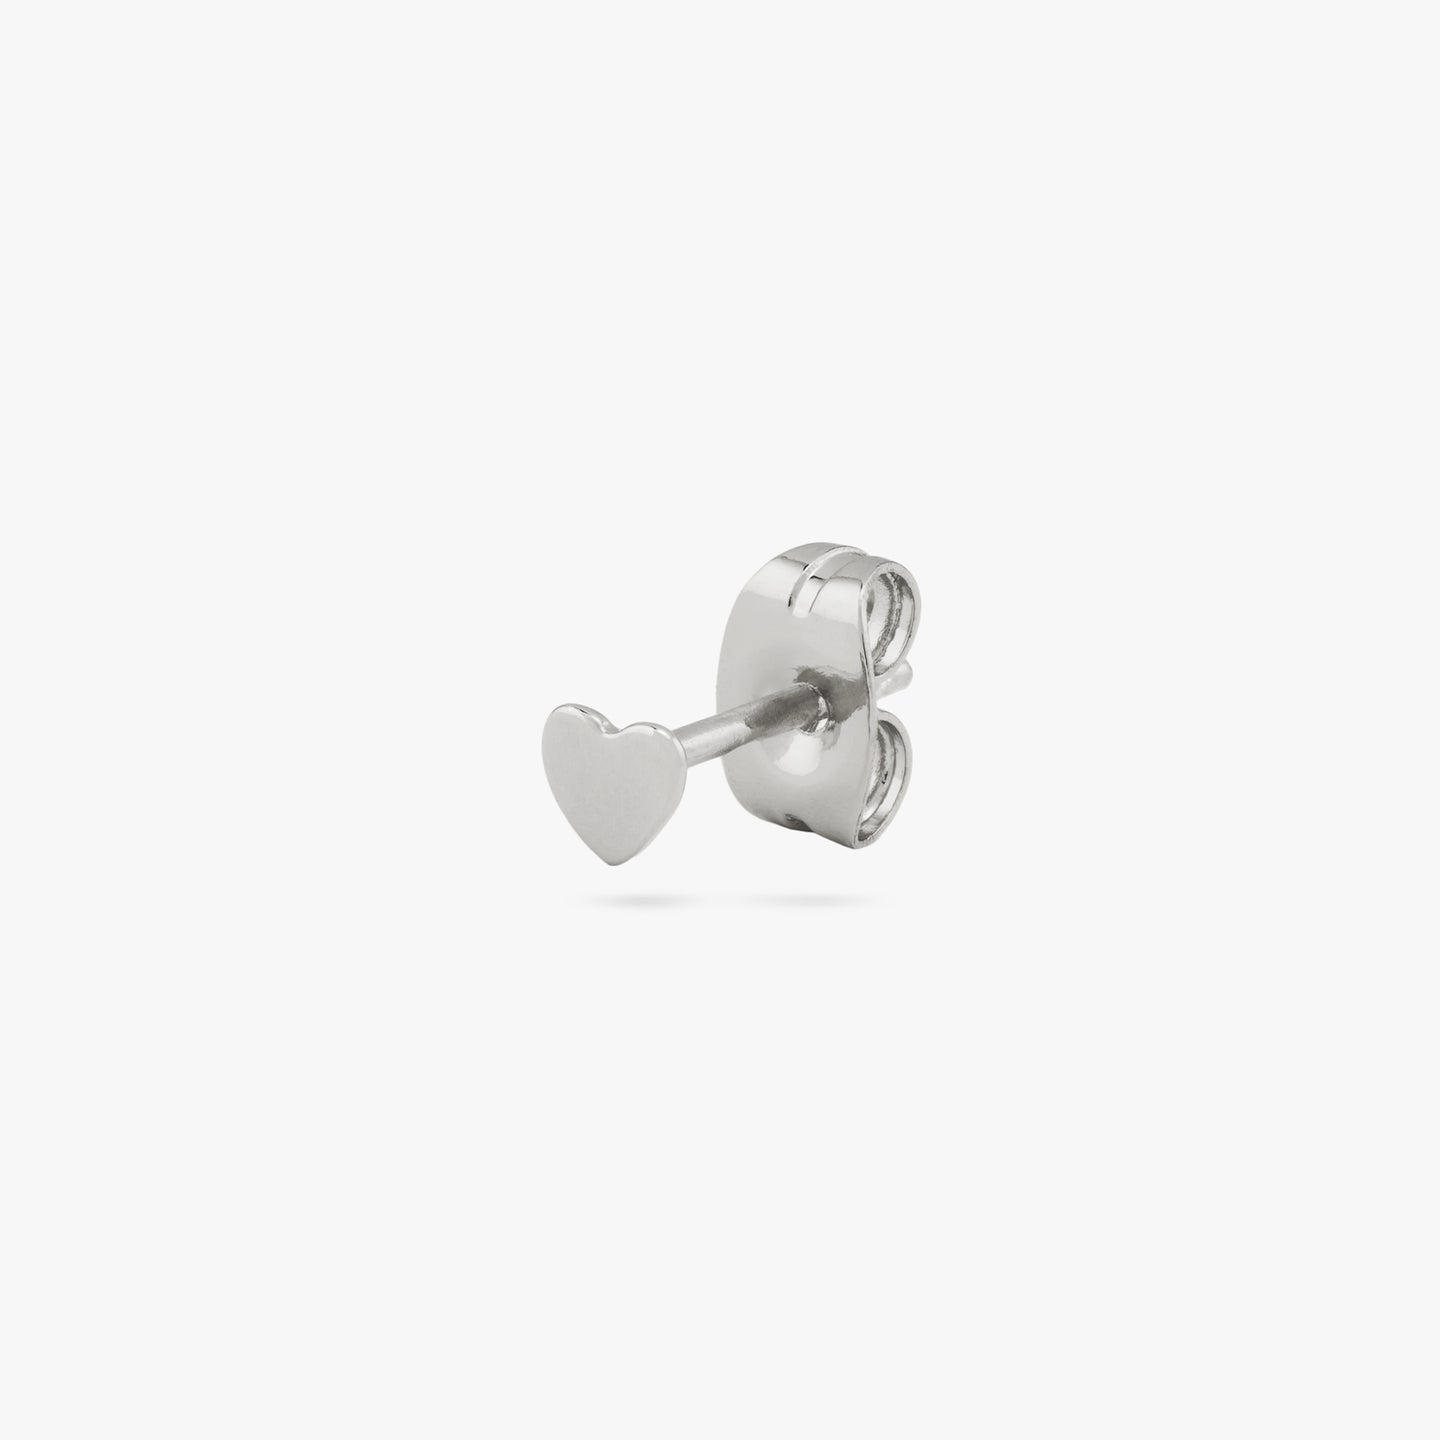 This is a small silver stud in the shape of a heart color:null|silver